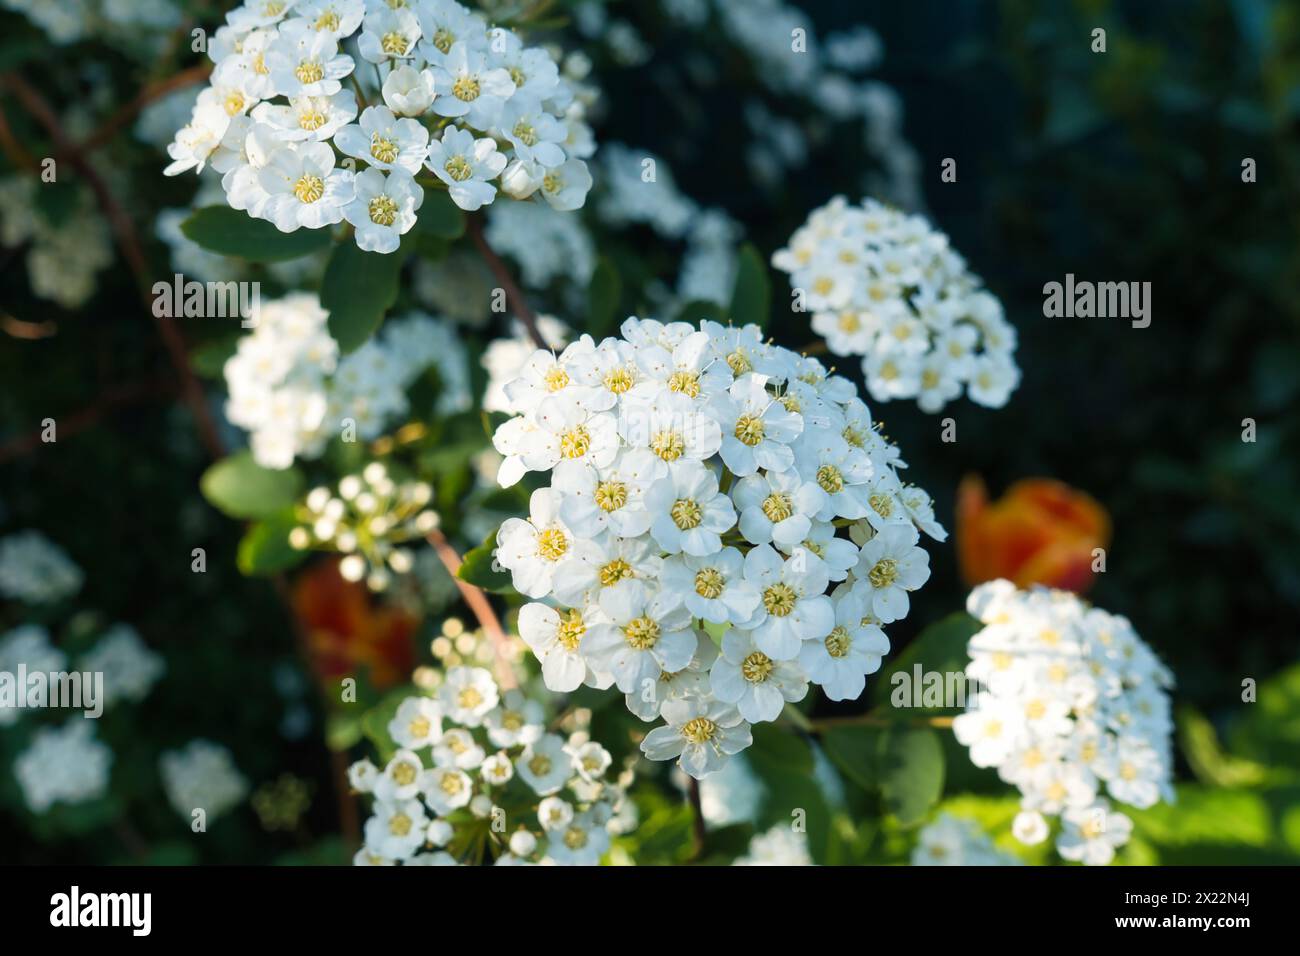 Gorgeous White Astilbe Flowers Blooming in Our Garden. summer, sun, sunny, sunshine, good weather, excursion, romantic, blossoms, splendid spirea Stock Photo